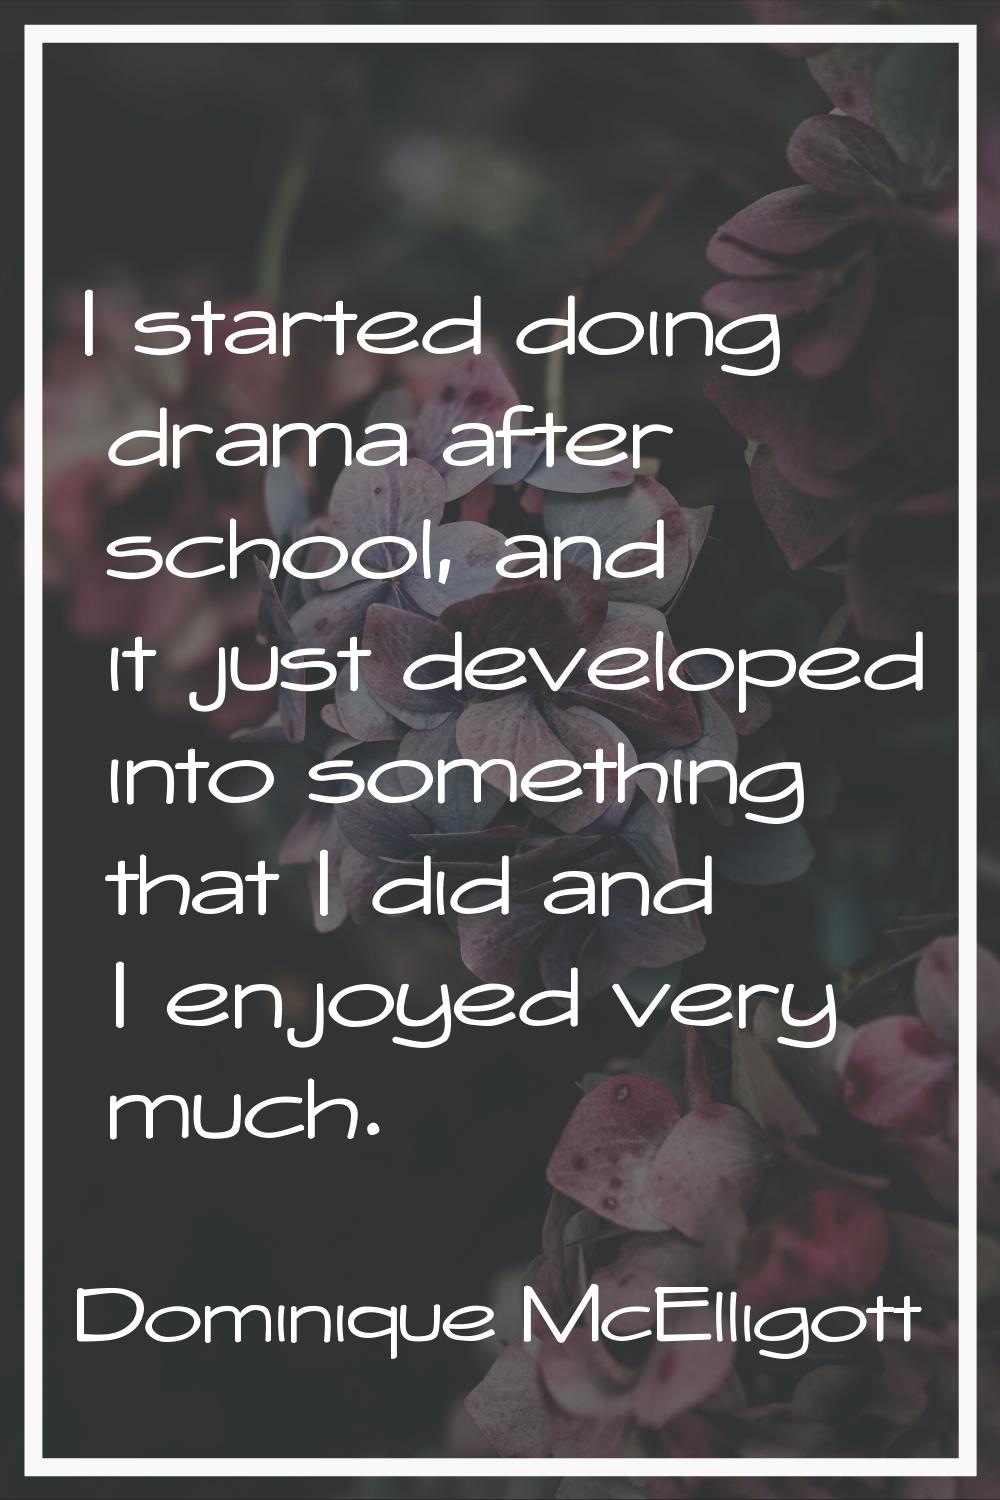 I started doing drama after school, and it just developed into something that I did and I enjoyed v